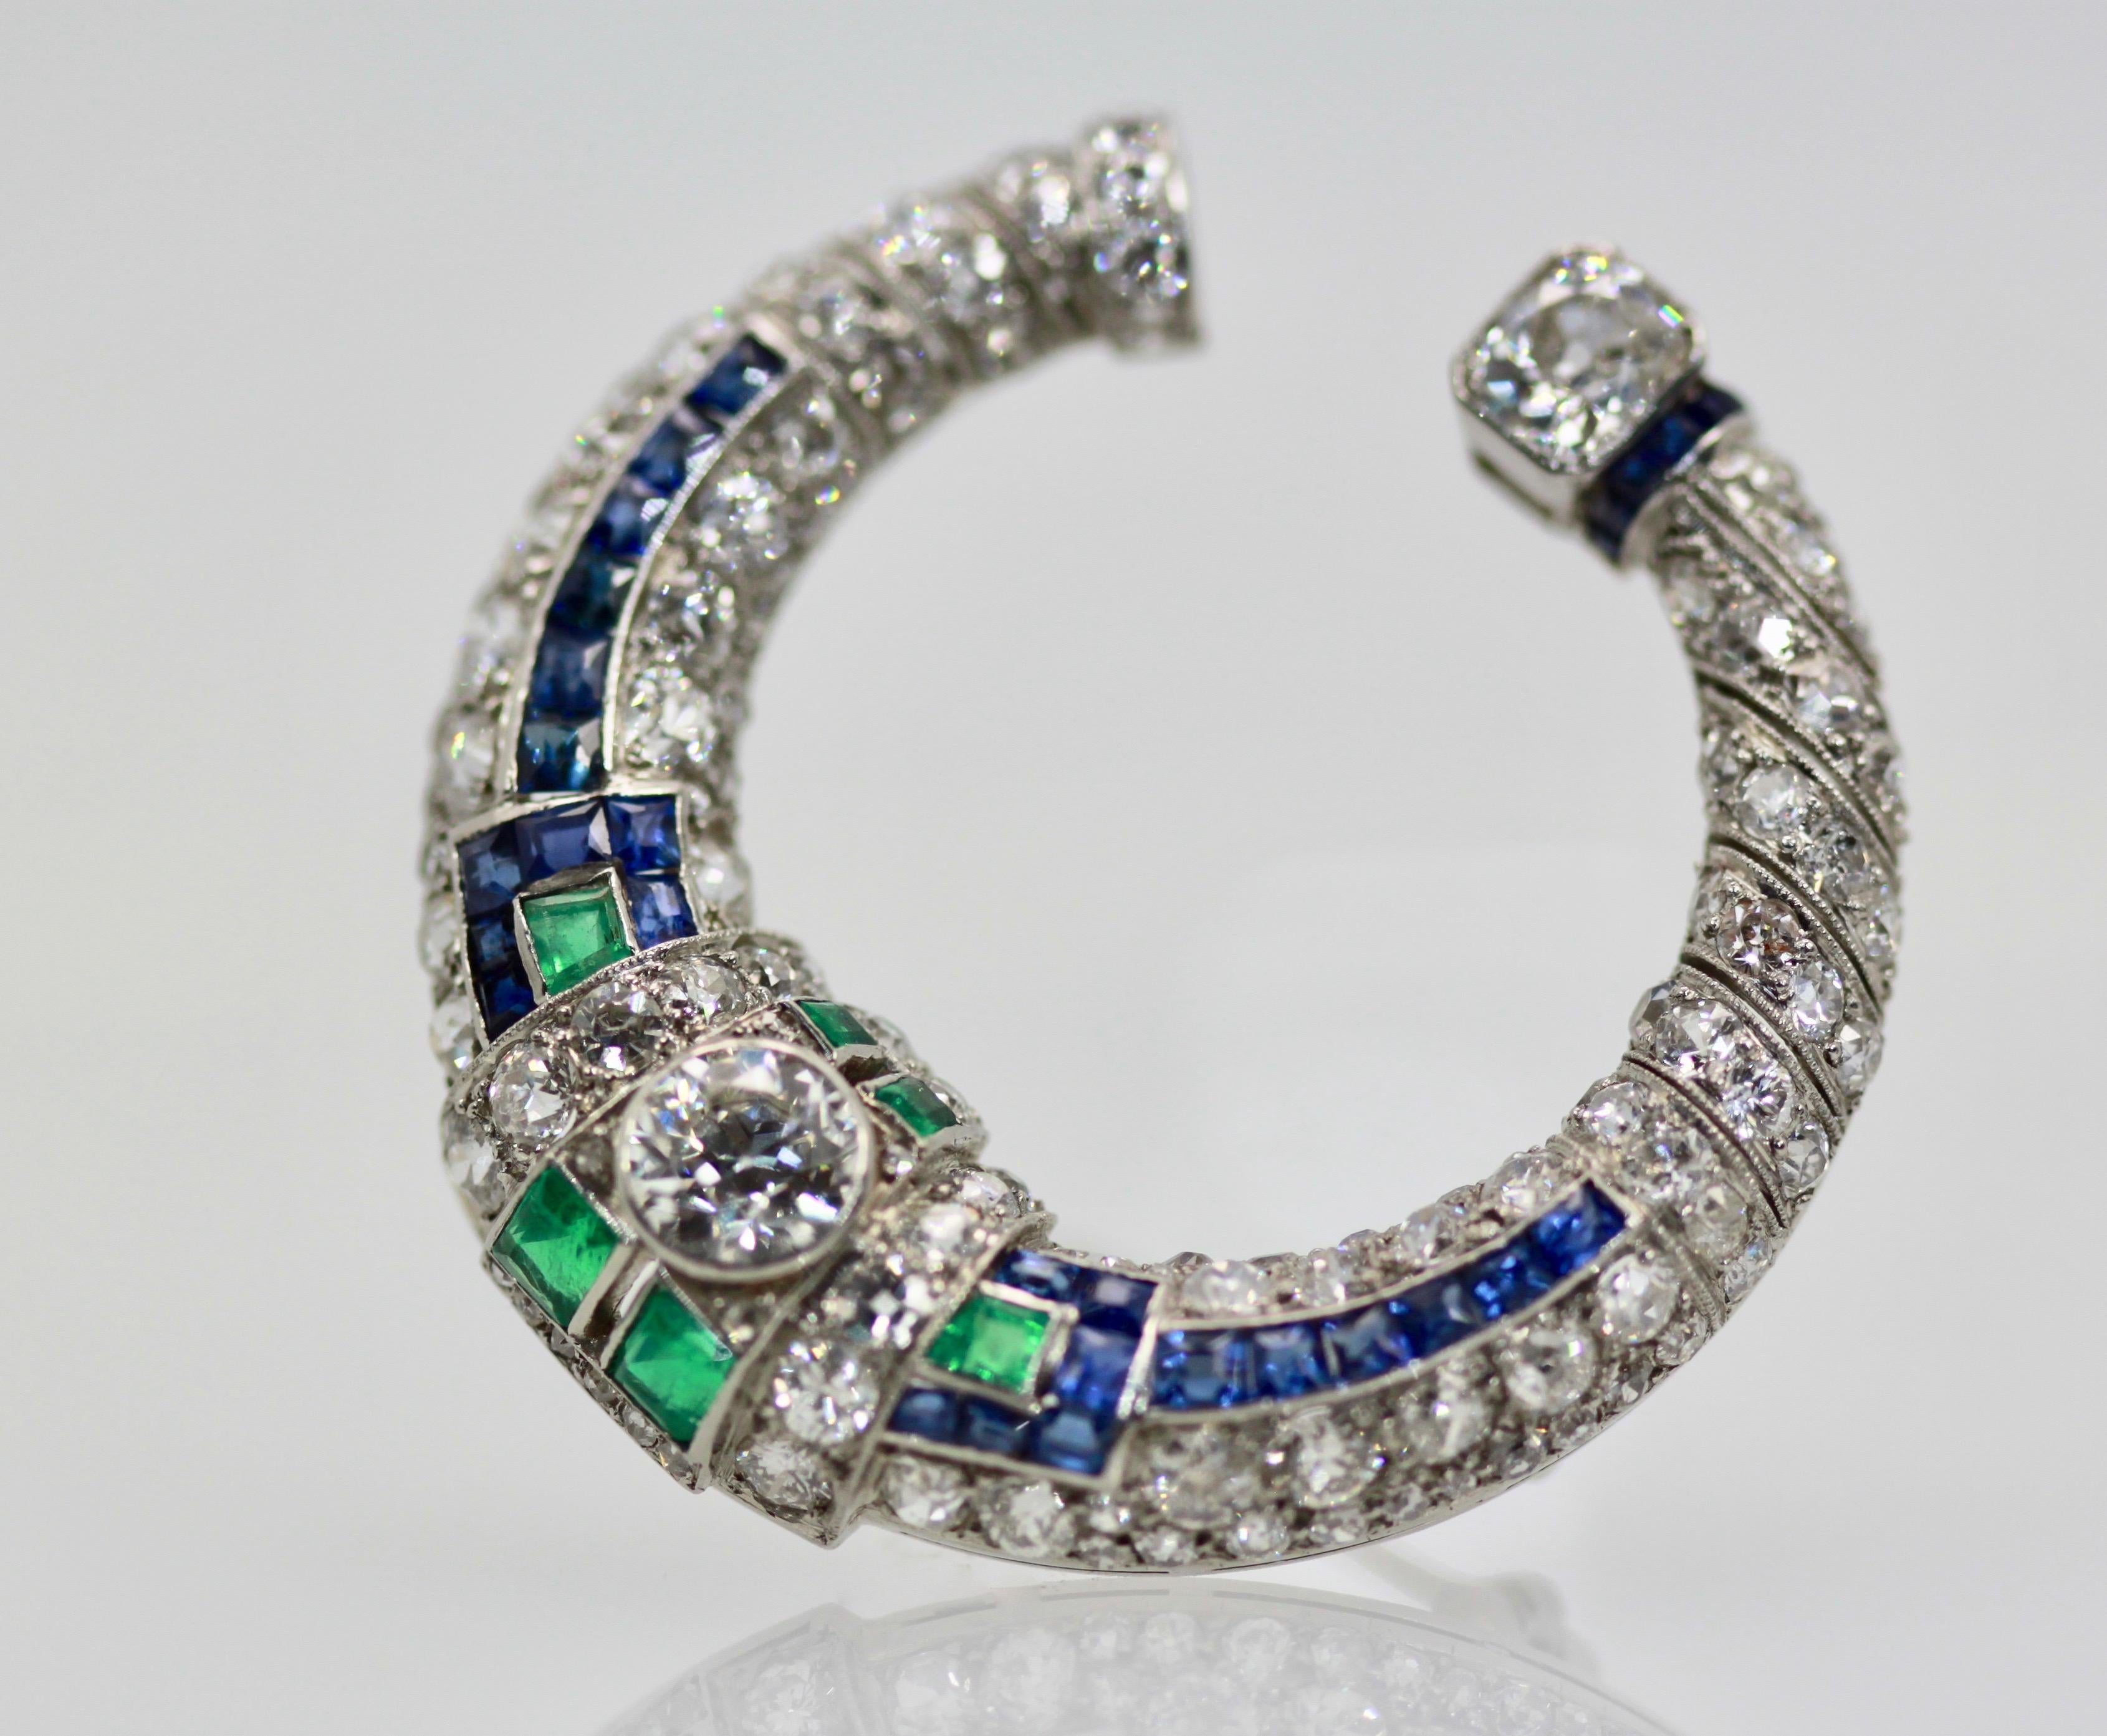 This Deco Platinum Sapphire and Emerald Brooch is shaped as a crescent or 